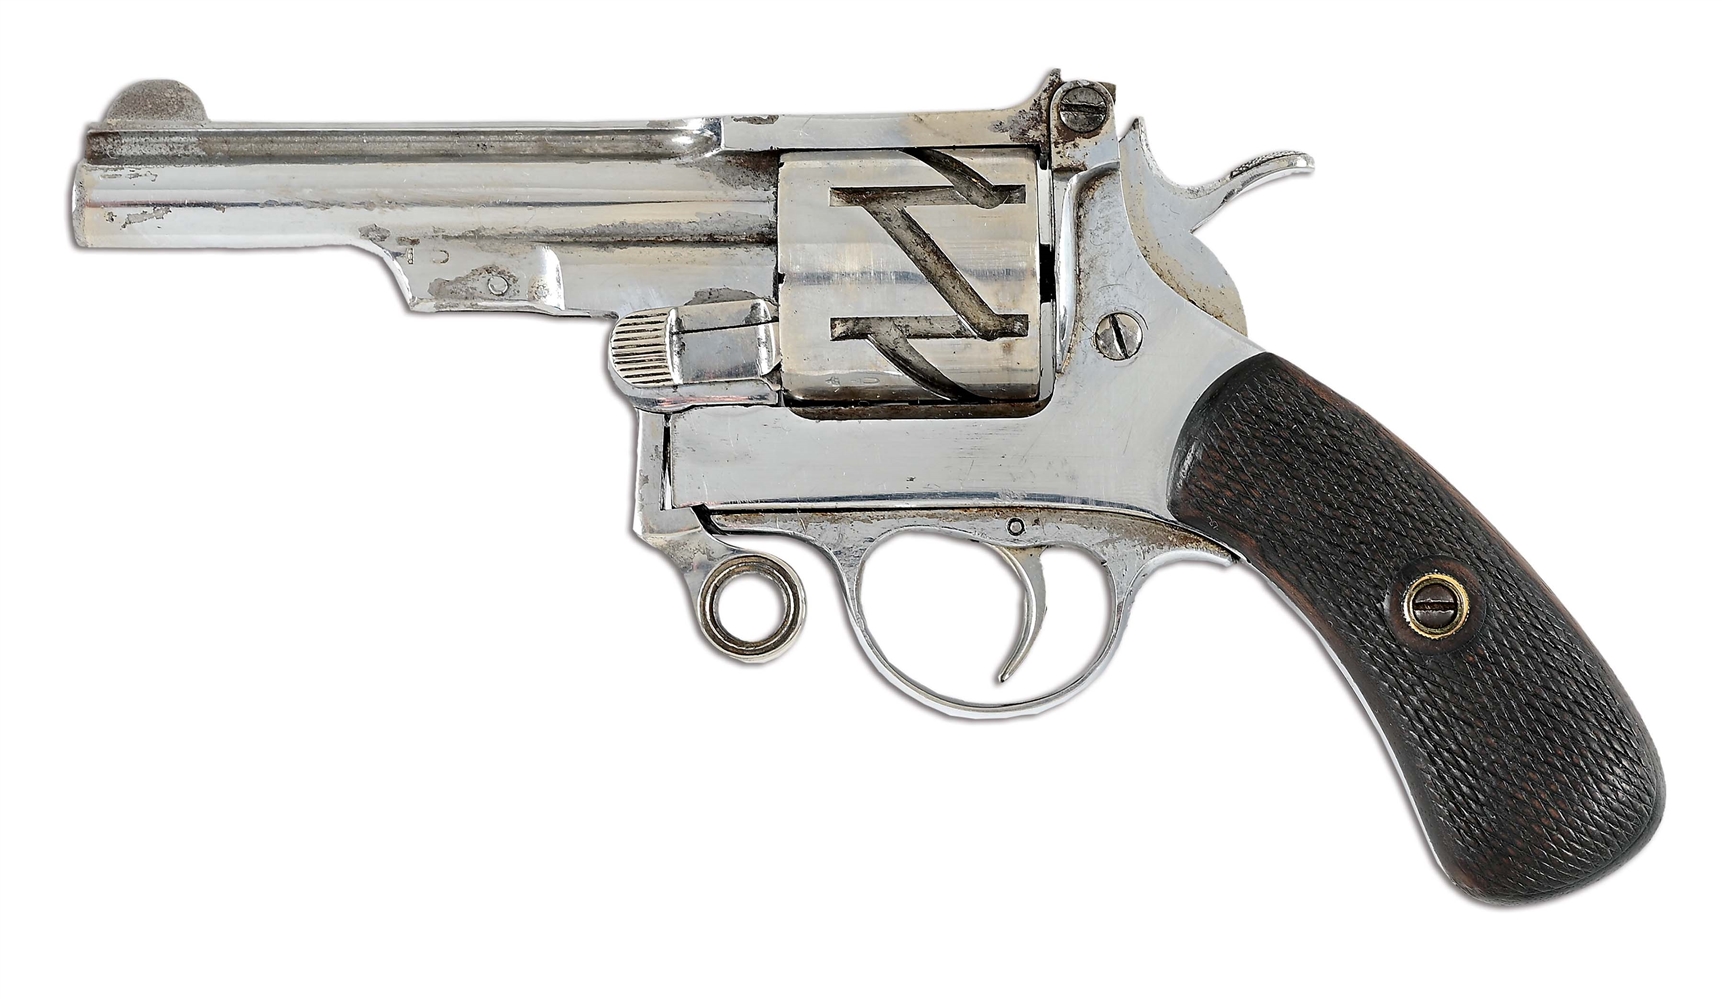 (A) SCARCE & DESIRABLE EARLY PRODUCTION MAUSER 1878 ZIG-ZAG REVOLVER.